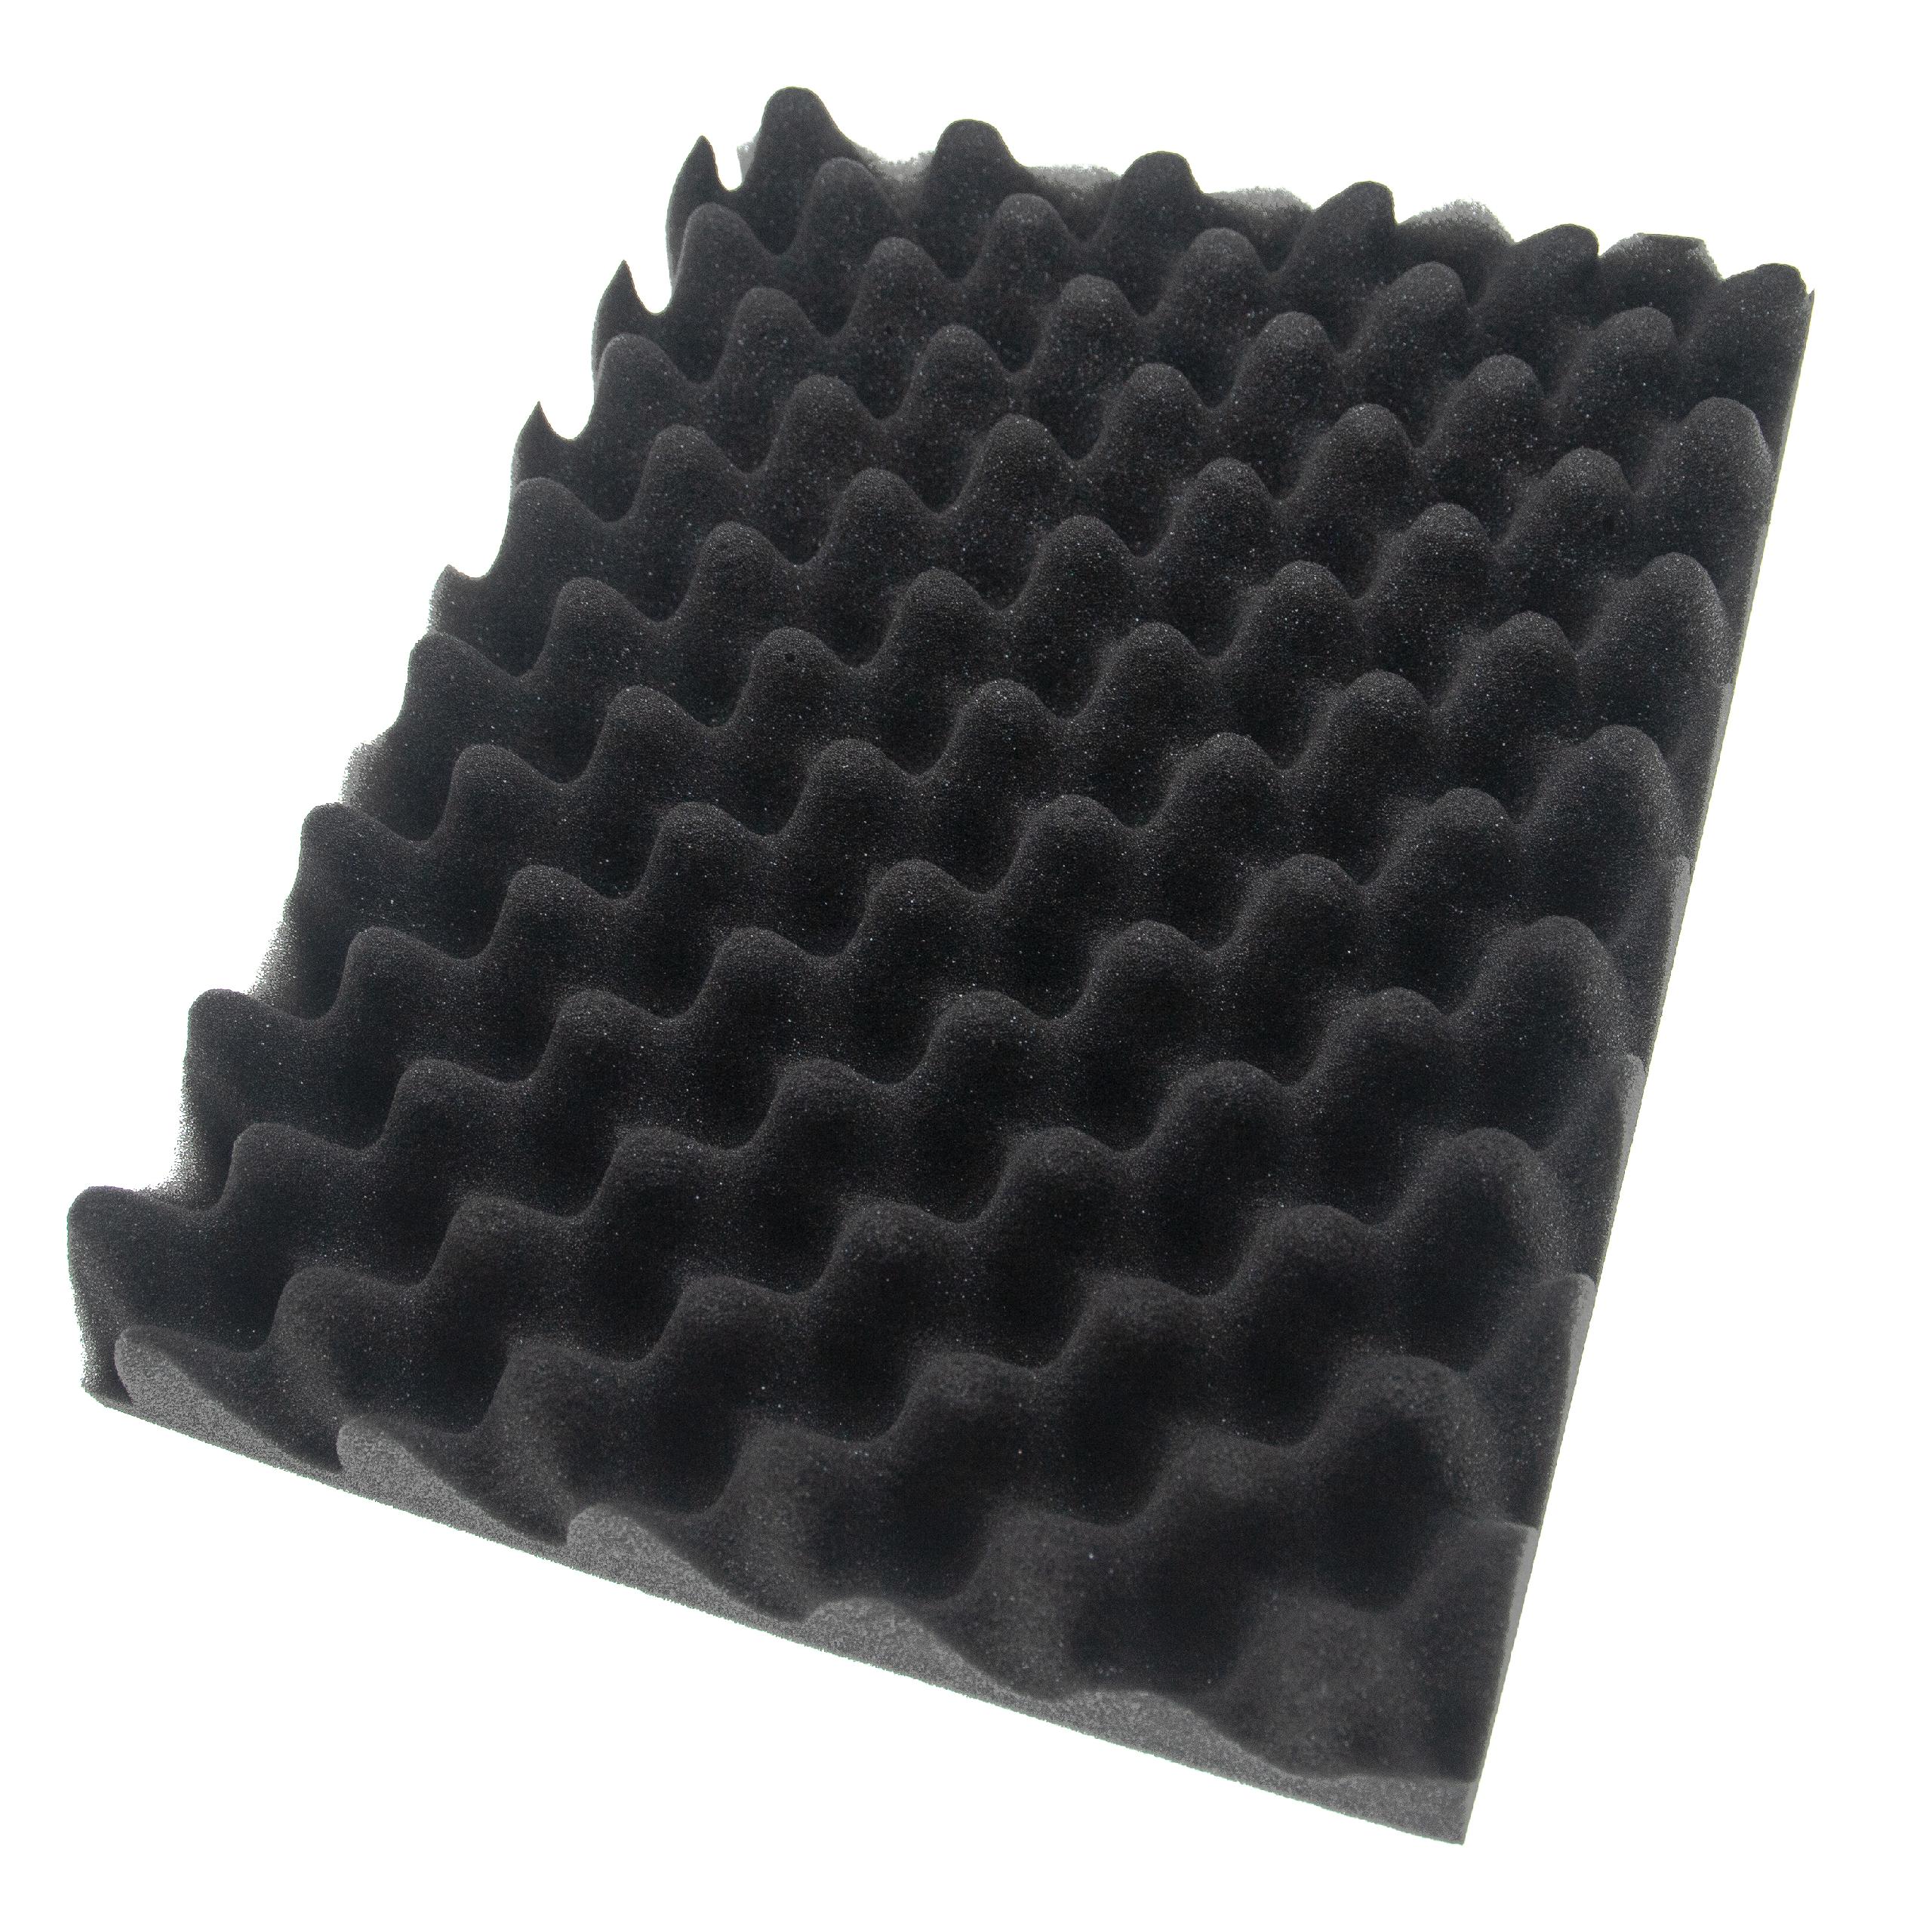 vhbw Lid Padding Replacement for Makita 264026496374 for Toolbox - Studded Surface, Foam, Soft